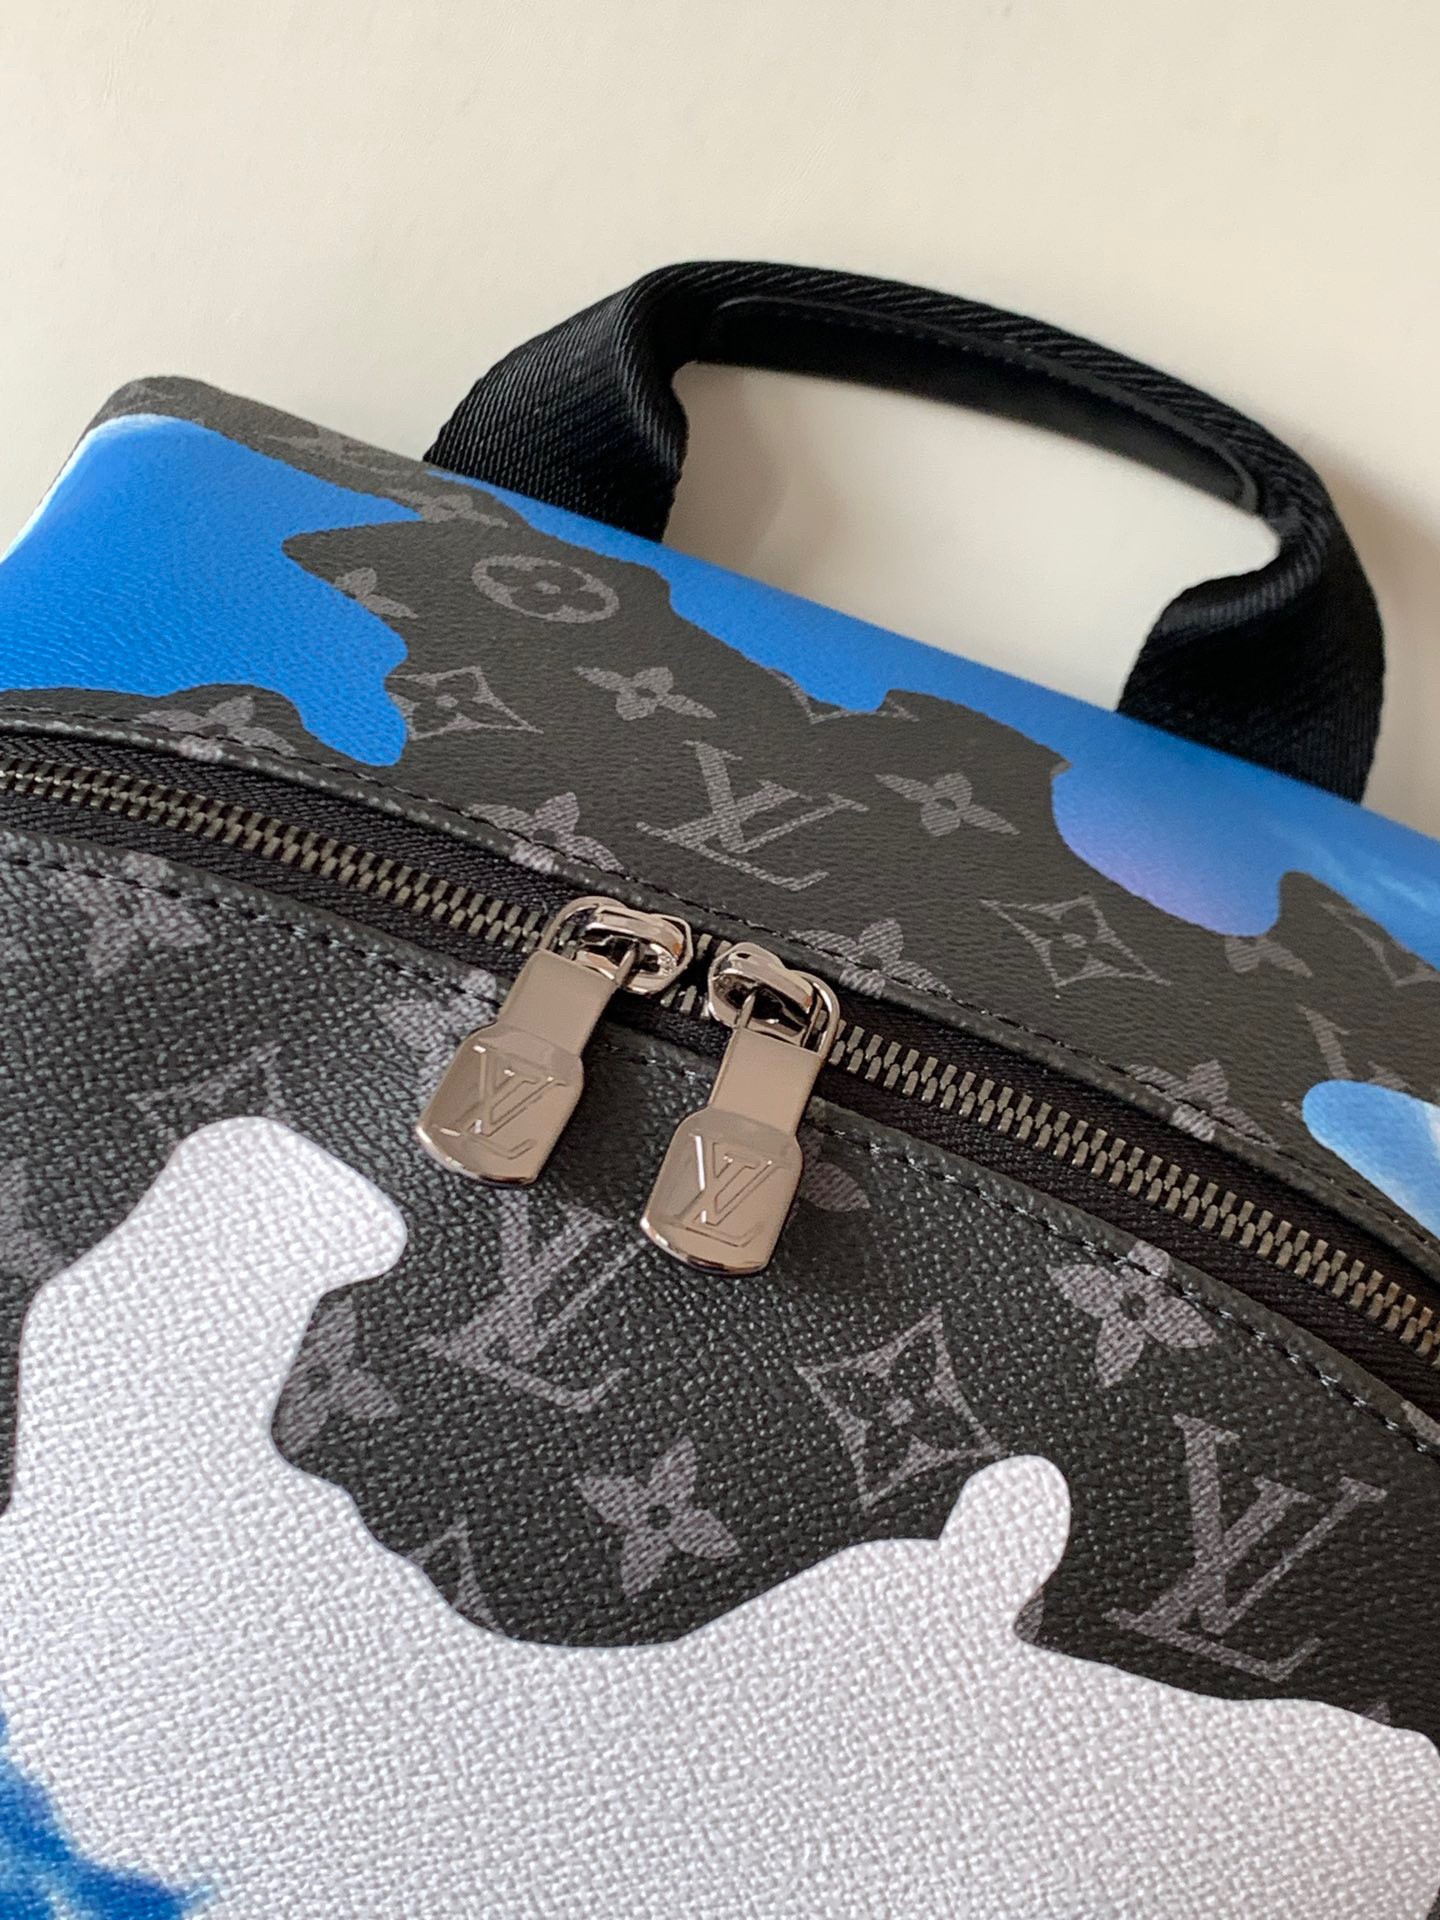 Louis Vuitton Discovery Backpack Monogram Eclipse Gaston Label